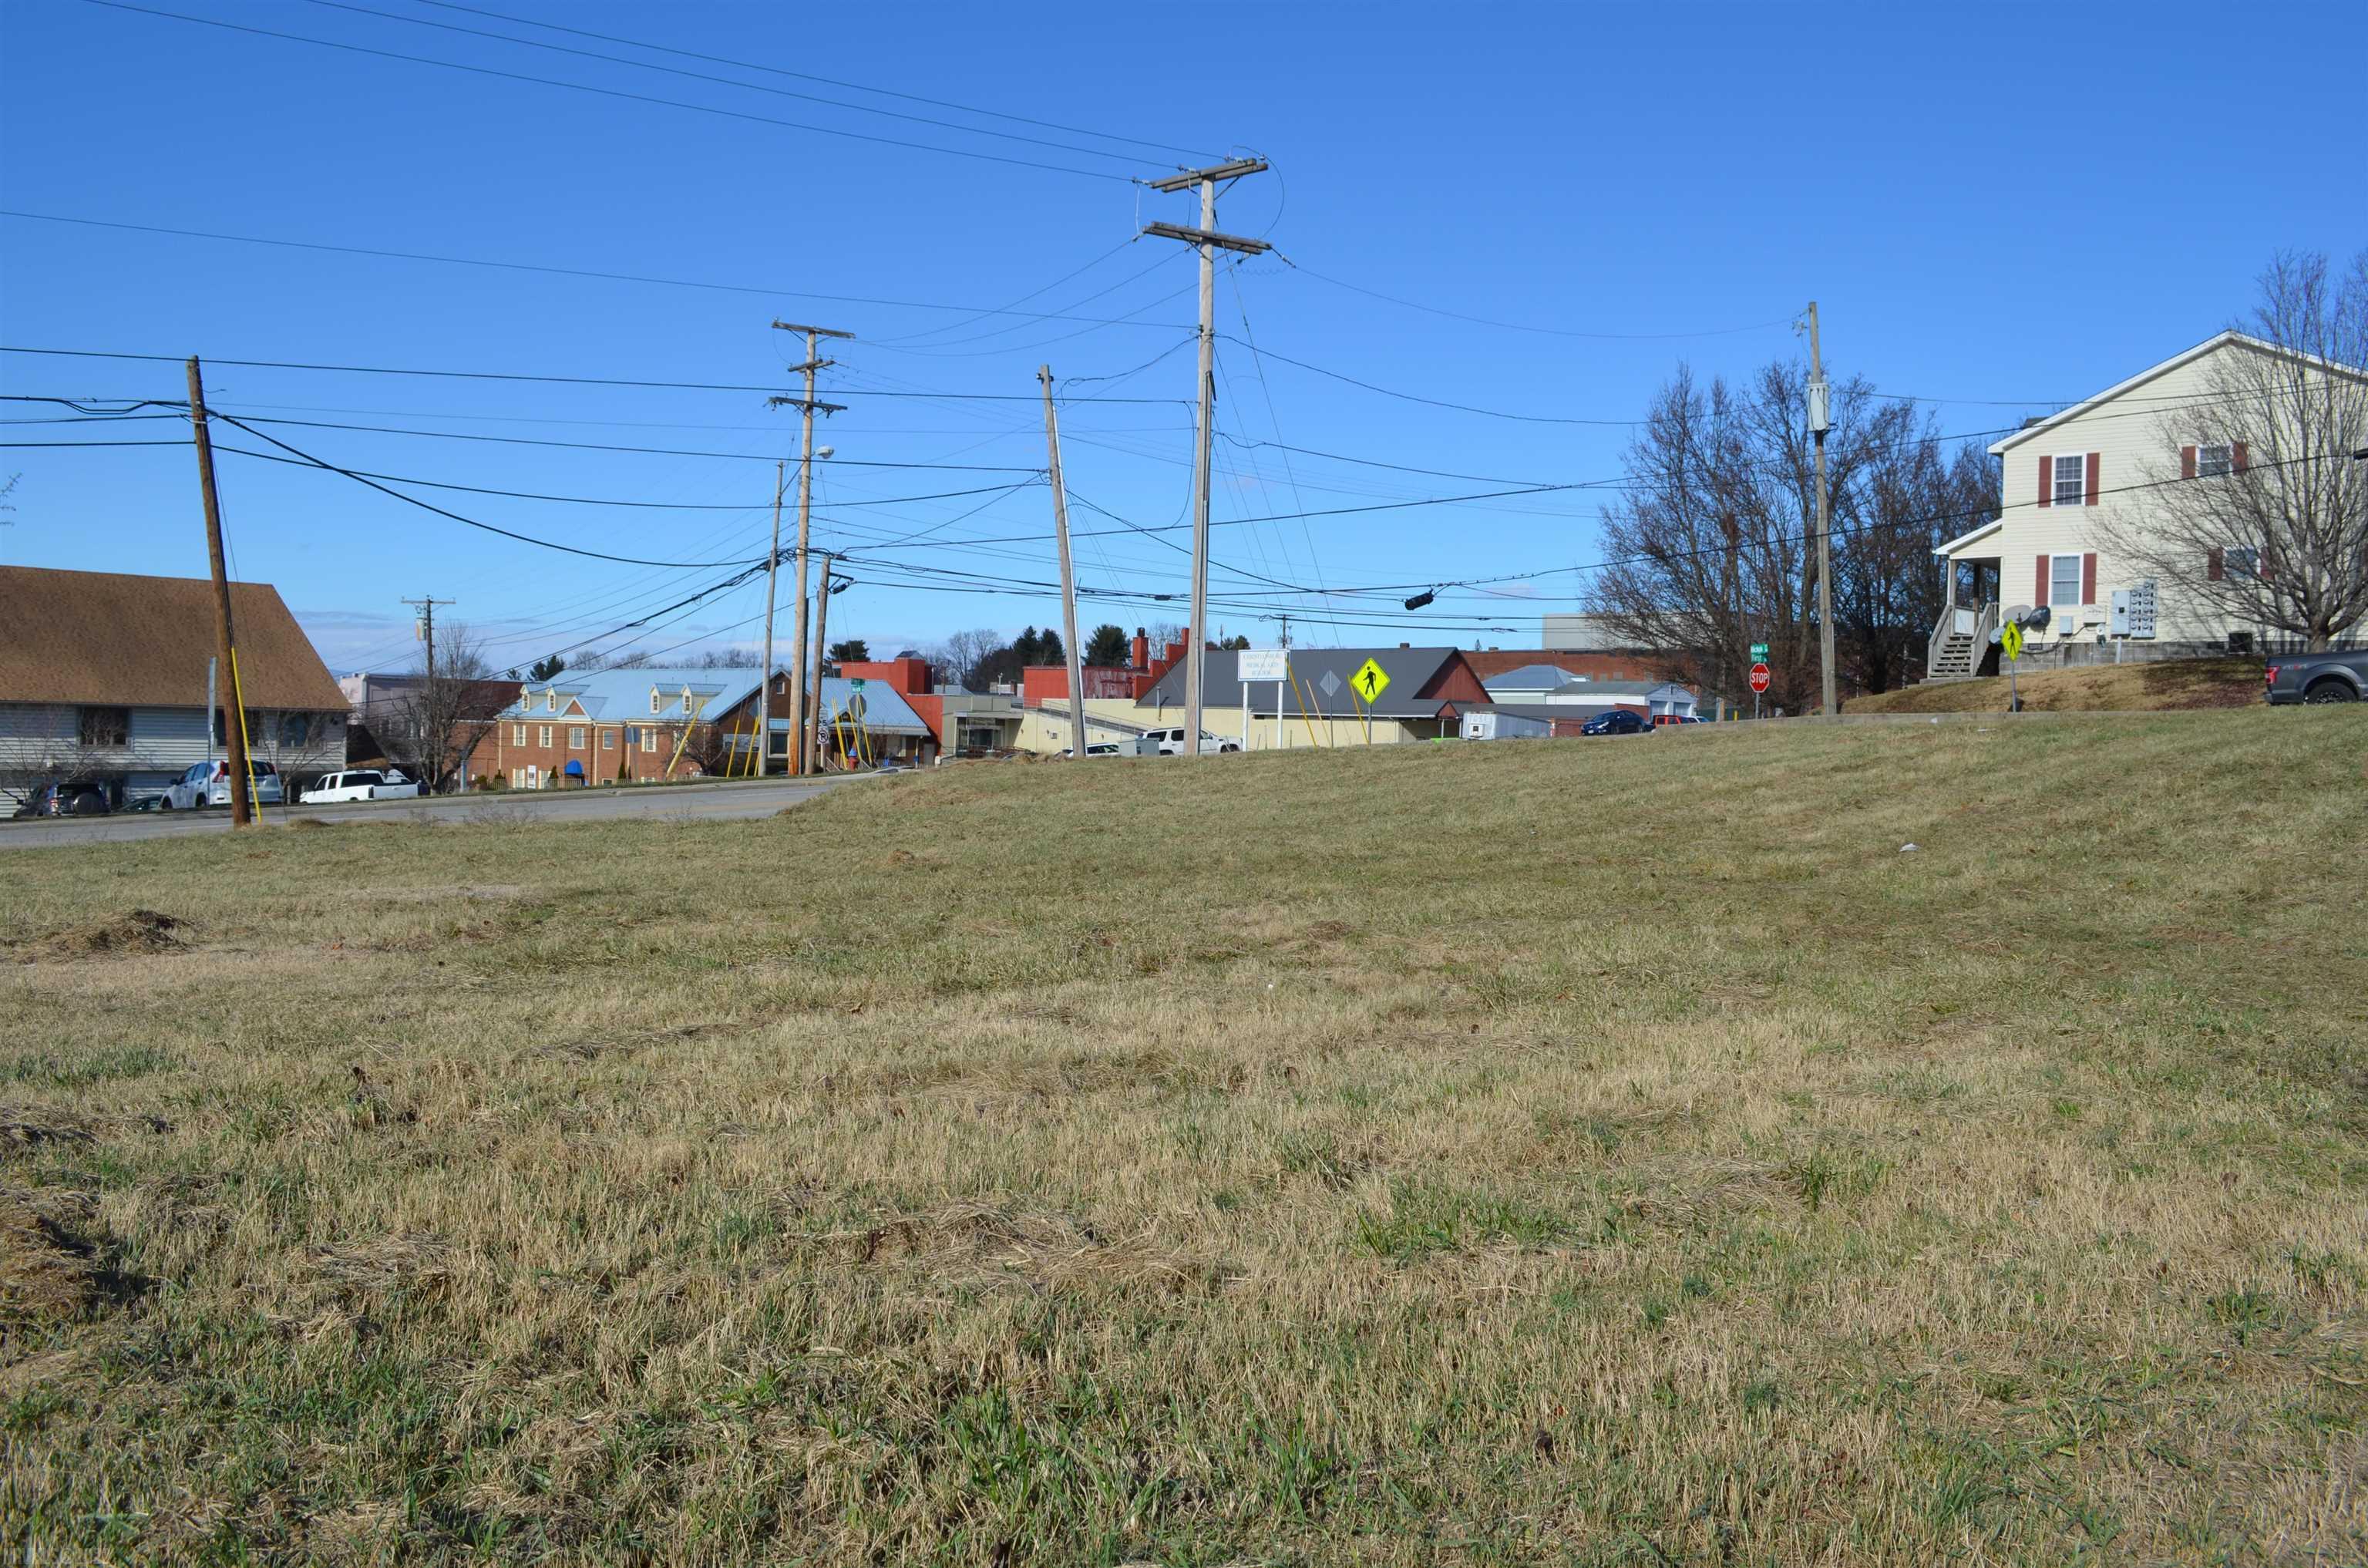 A rare find Commercial lot within walking distance to downtown Christiansburg. Perfect location with high traffic count.  This property is zoned B2/Business Central with many uses available. (Multi family, apartments, restaurant, retail, repair/service facility, storage buildings, professional offices, etc.)  Survey available.